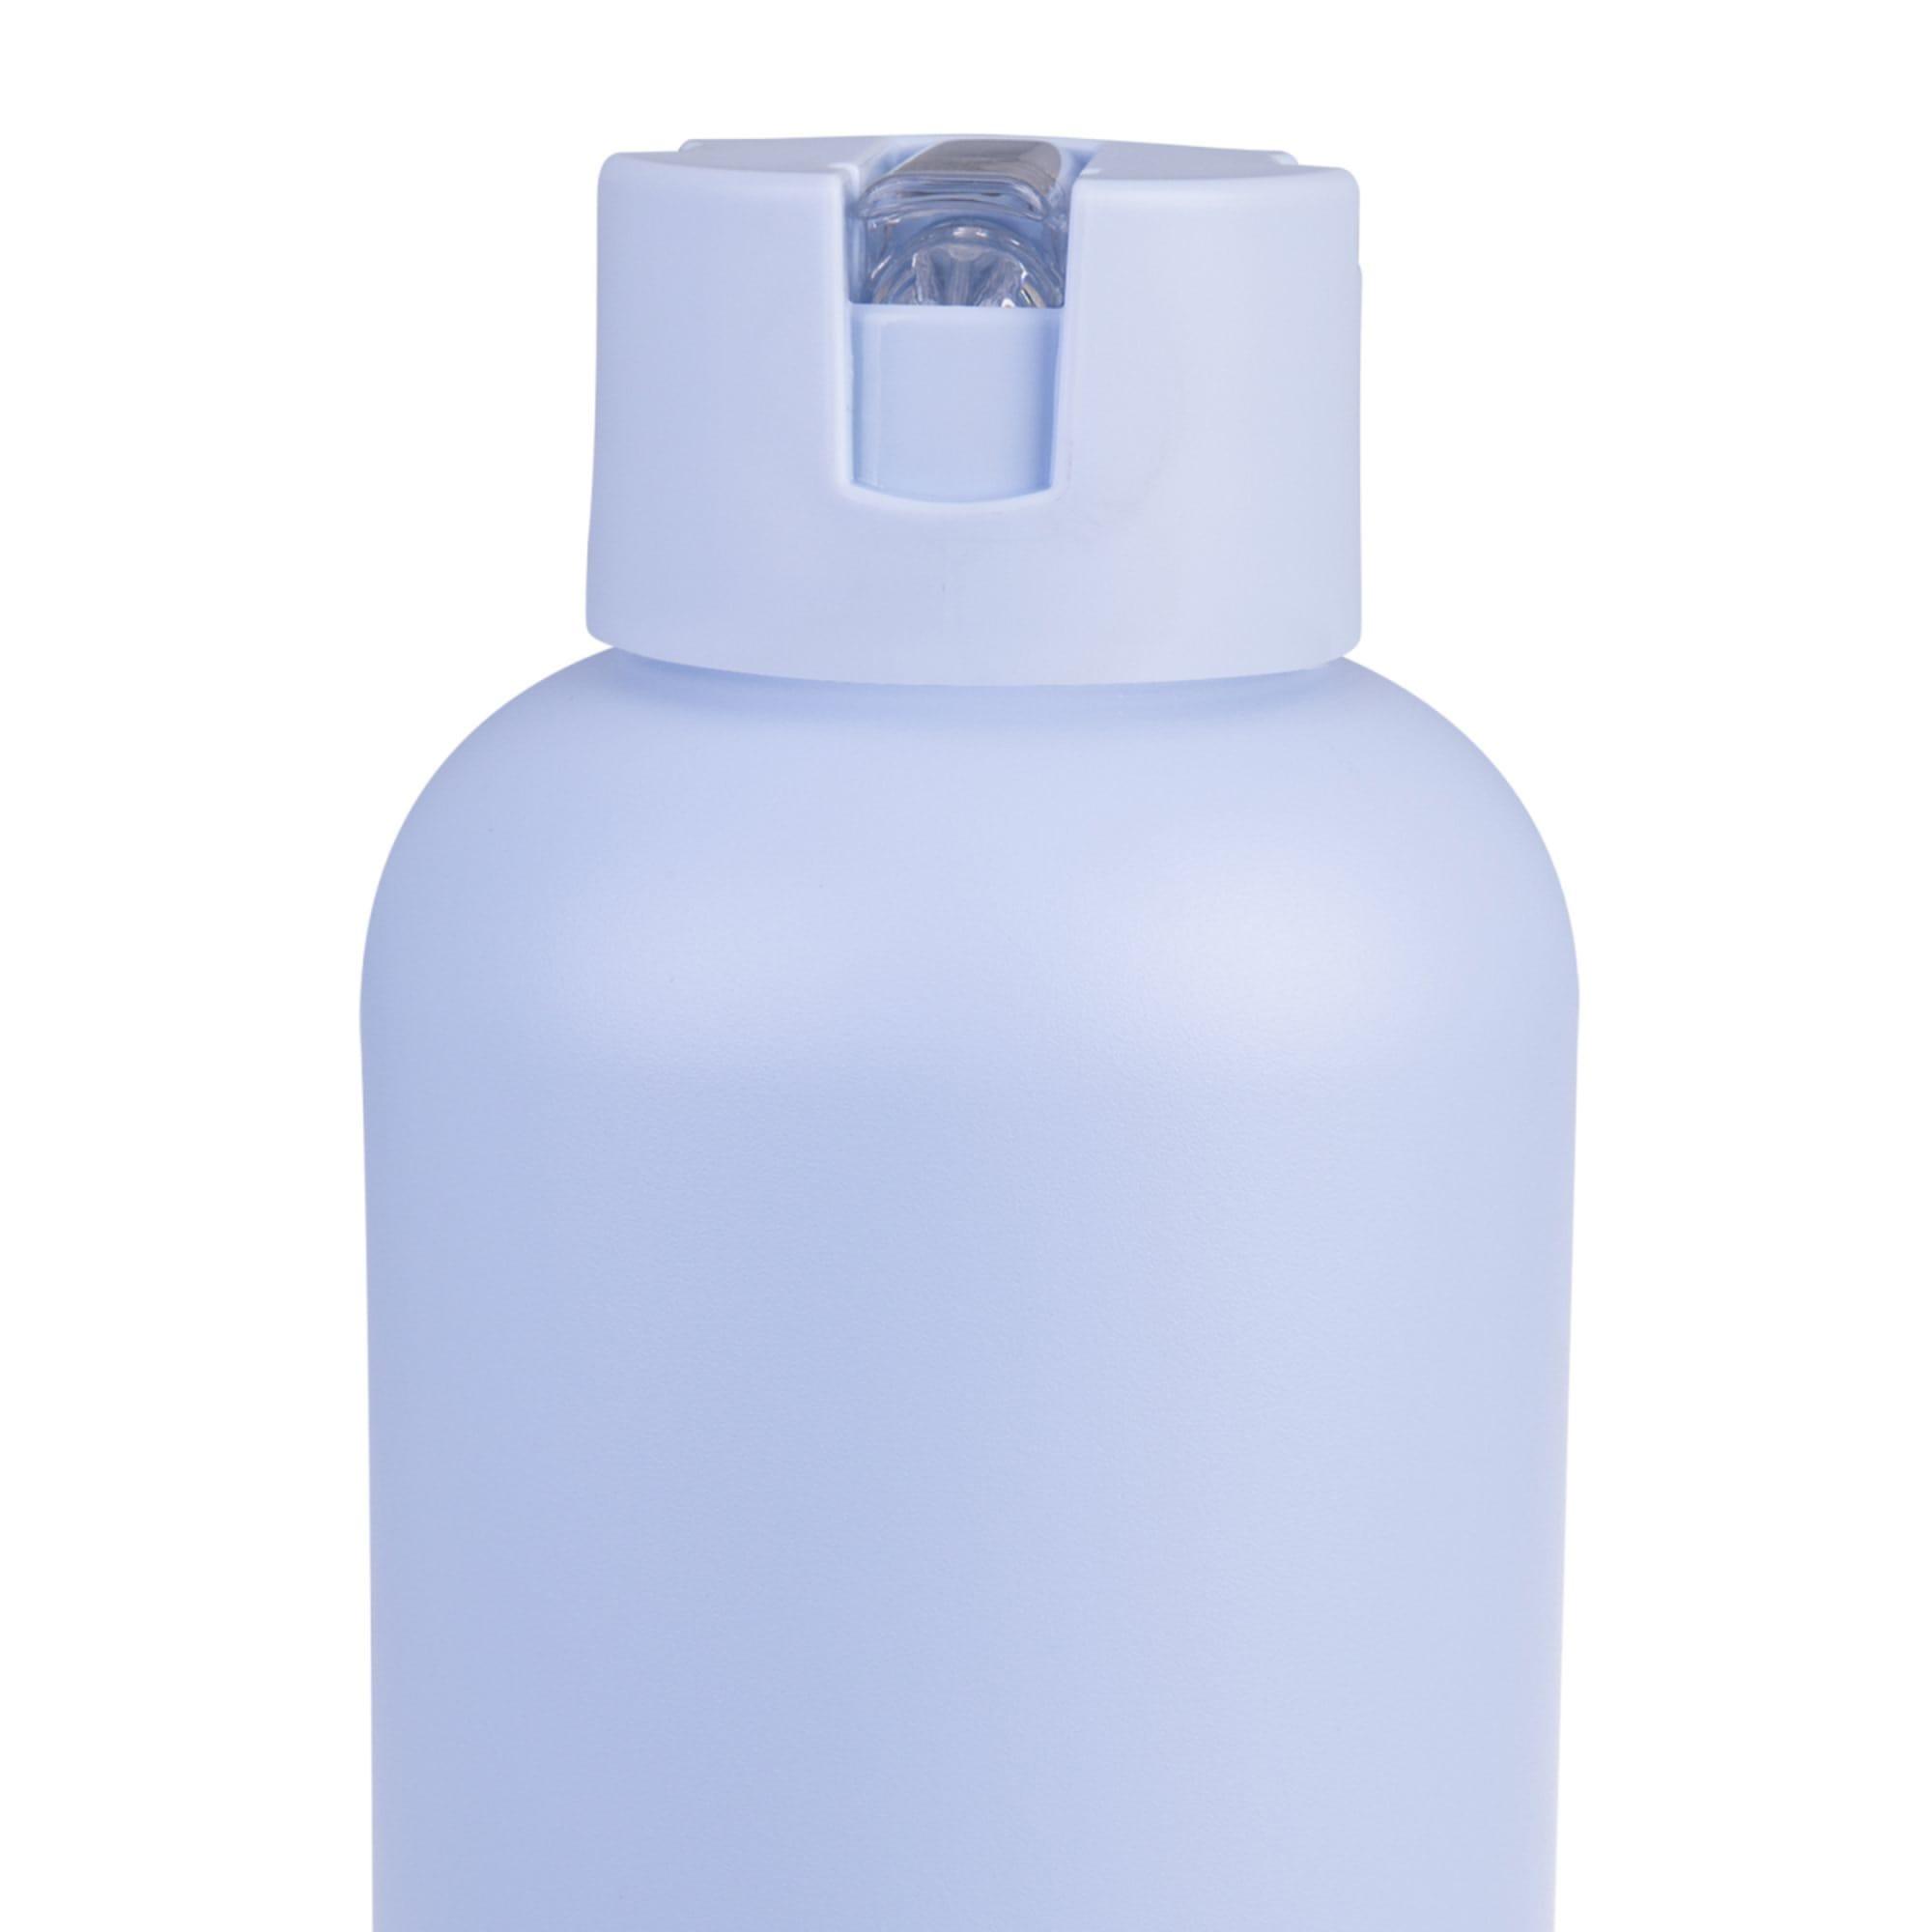 Oasis Moda Triple Wall Insulated Drink Bottle 1.5L Periwinkle Image 8